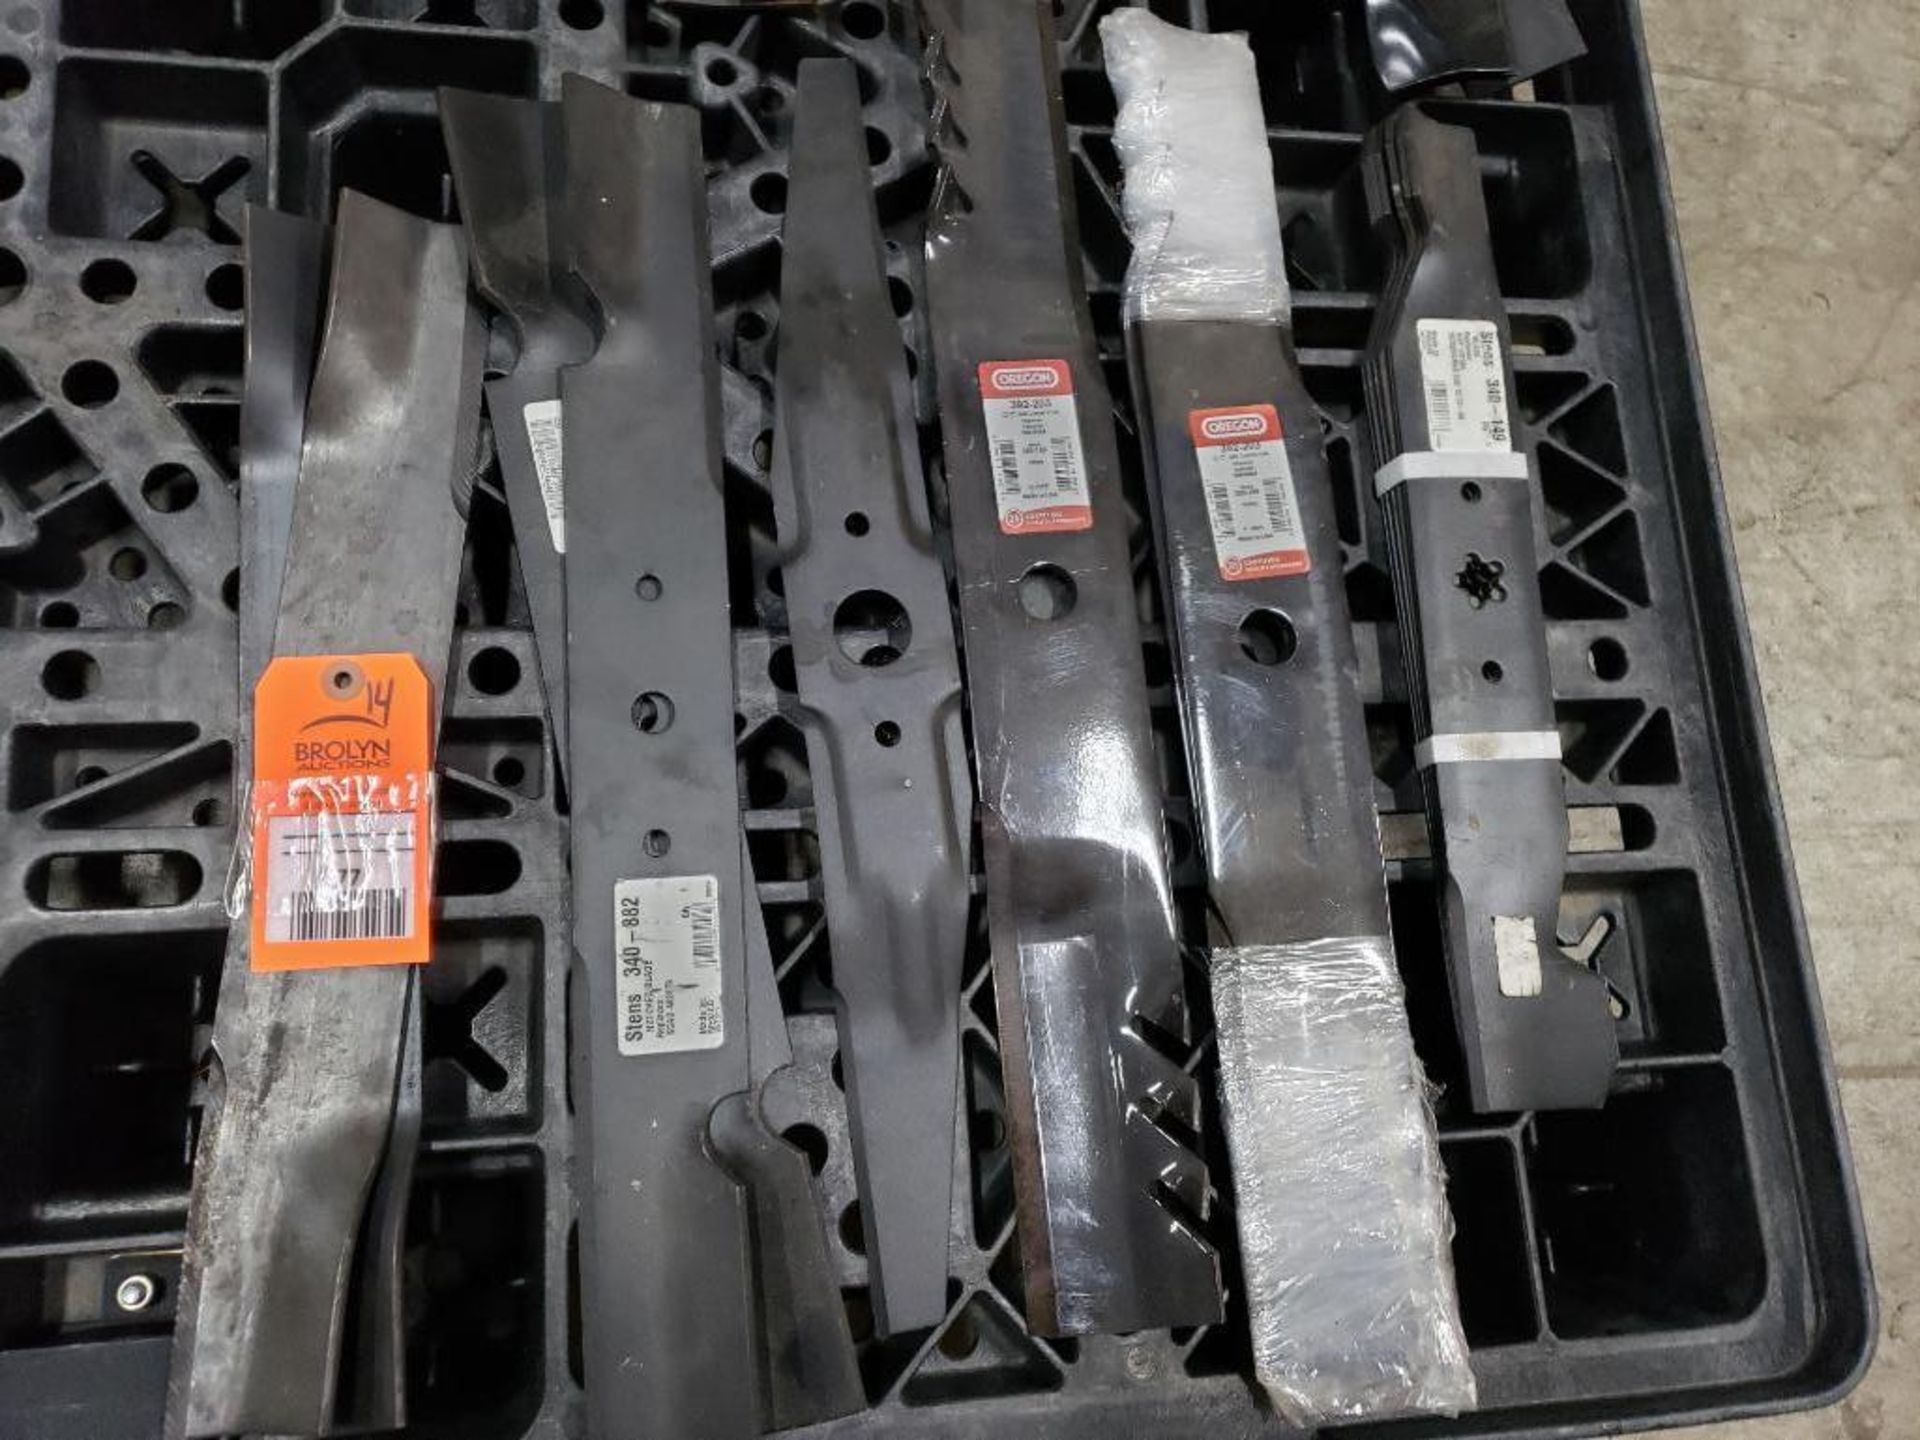 Qty 14 - Assorted mower blades. New old stock.